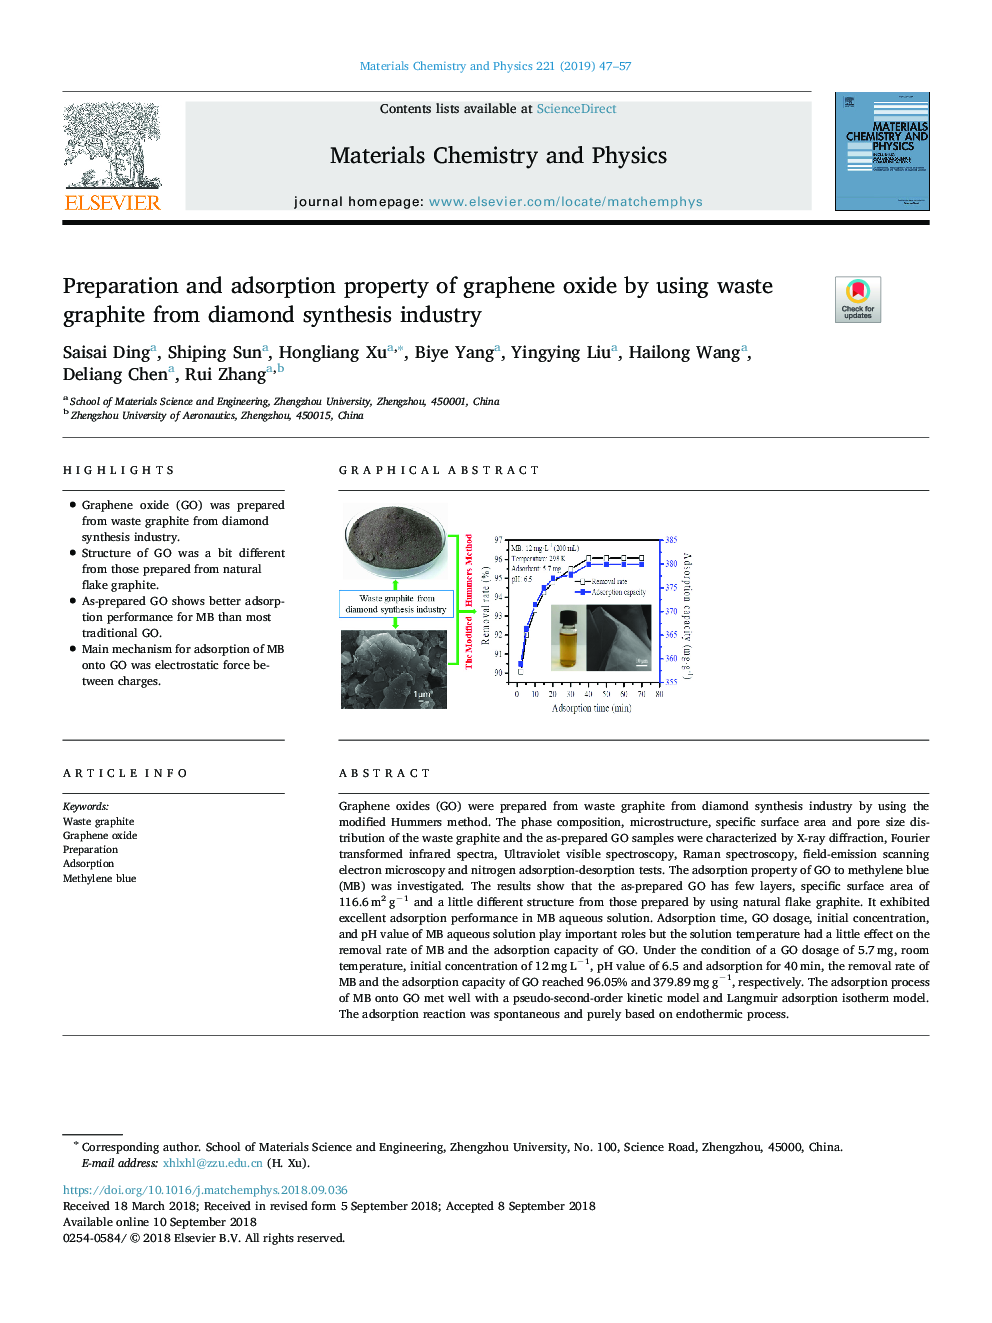 Preparation and adsorption property of graphene oxide by using waste graphite from diamond synthesis industry